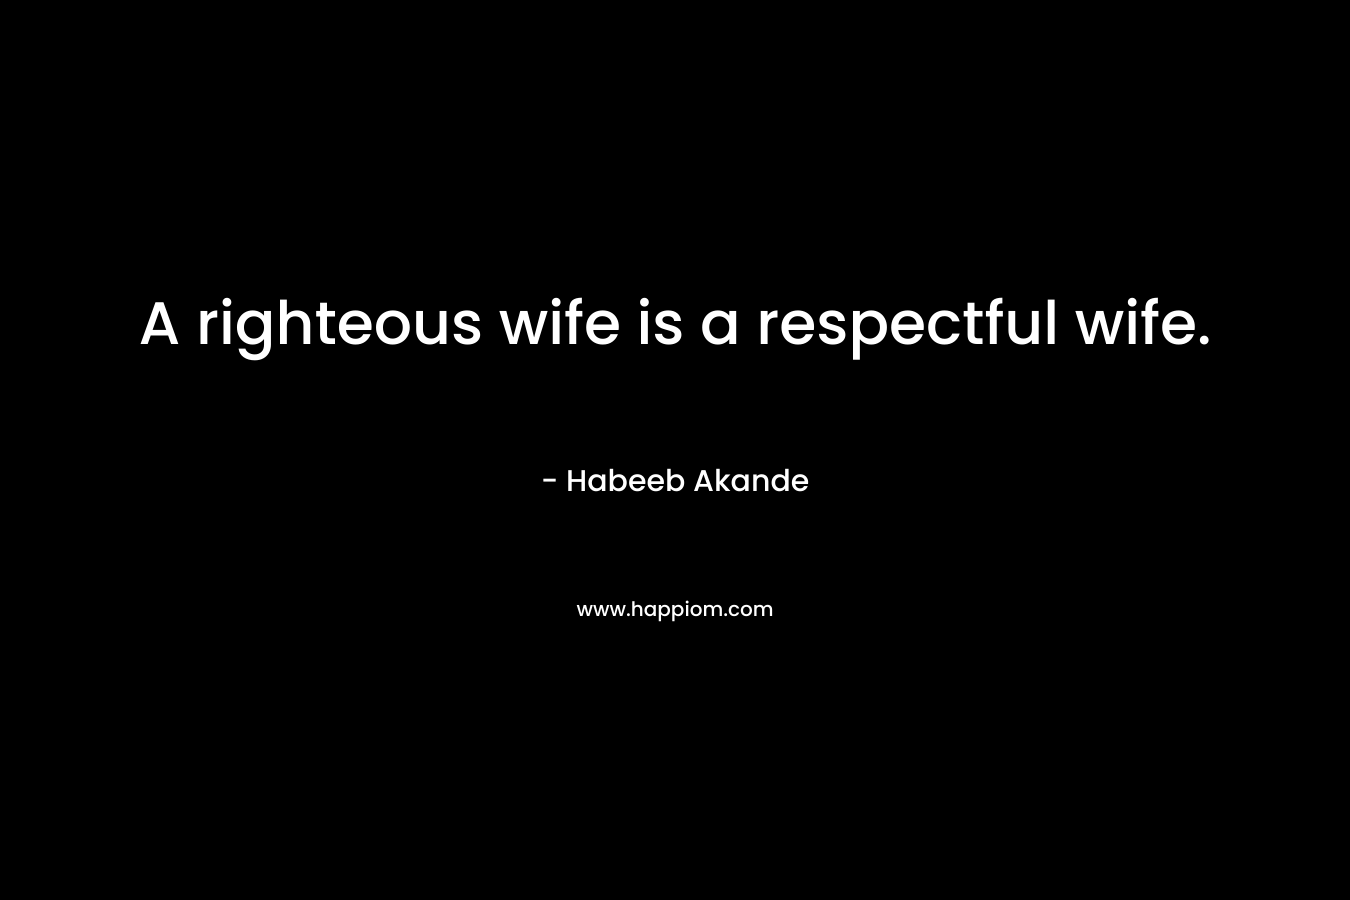 A righteous wife is a respectful wife.